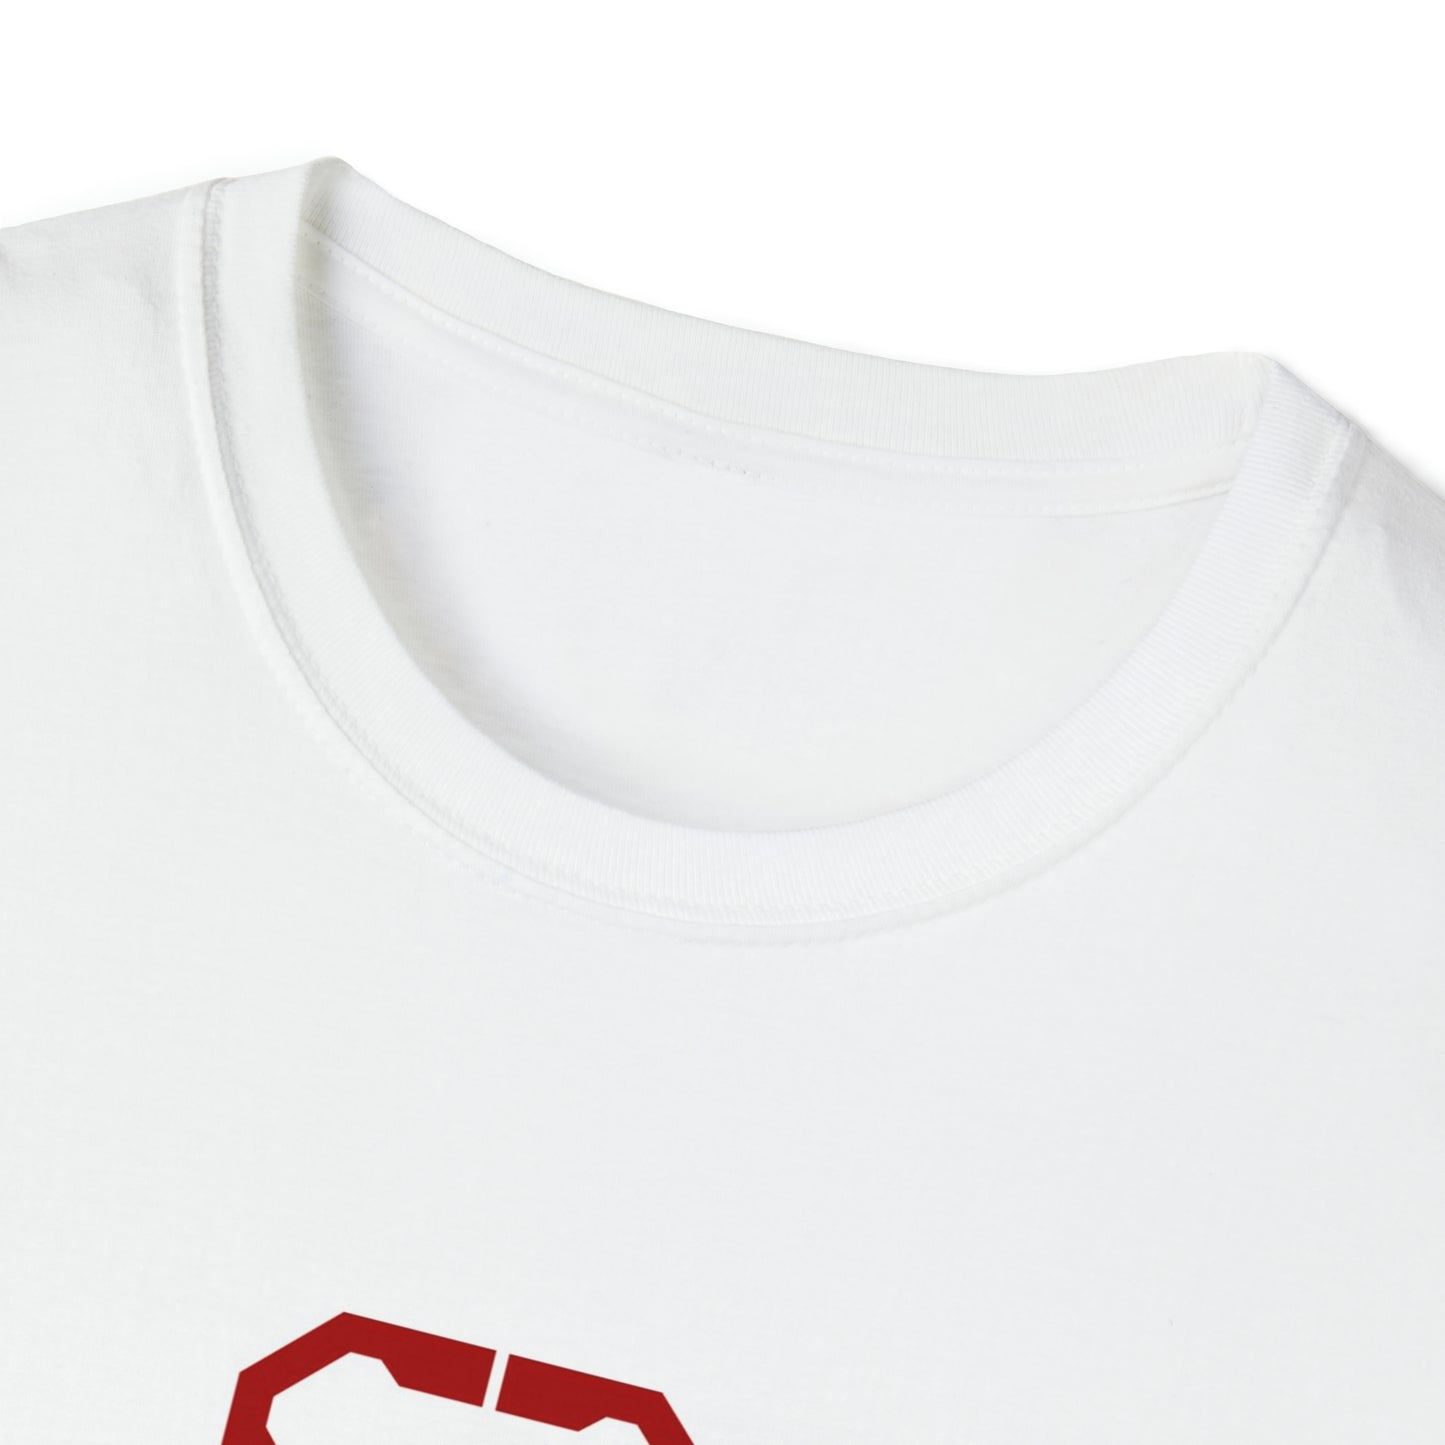 The Invincibles Team One Softstyle T-Shirt